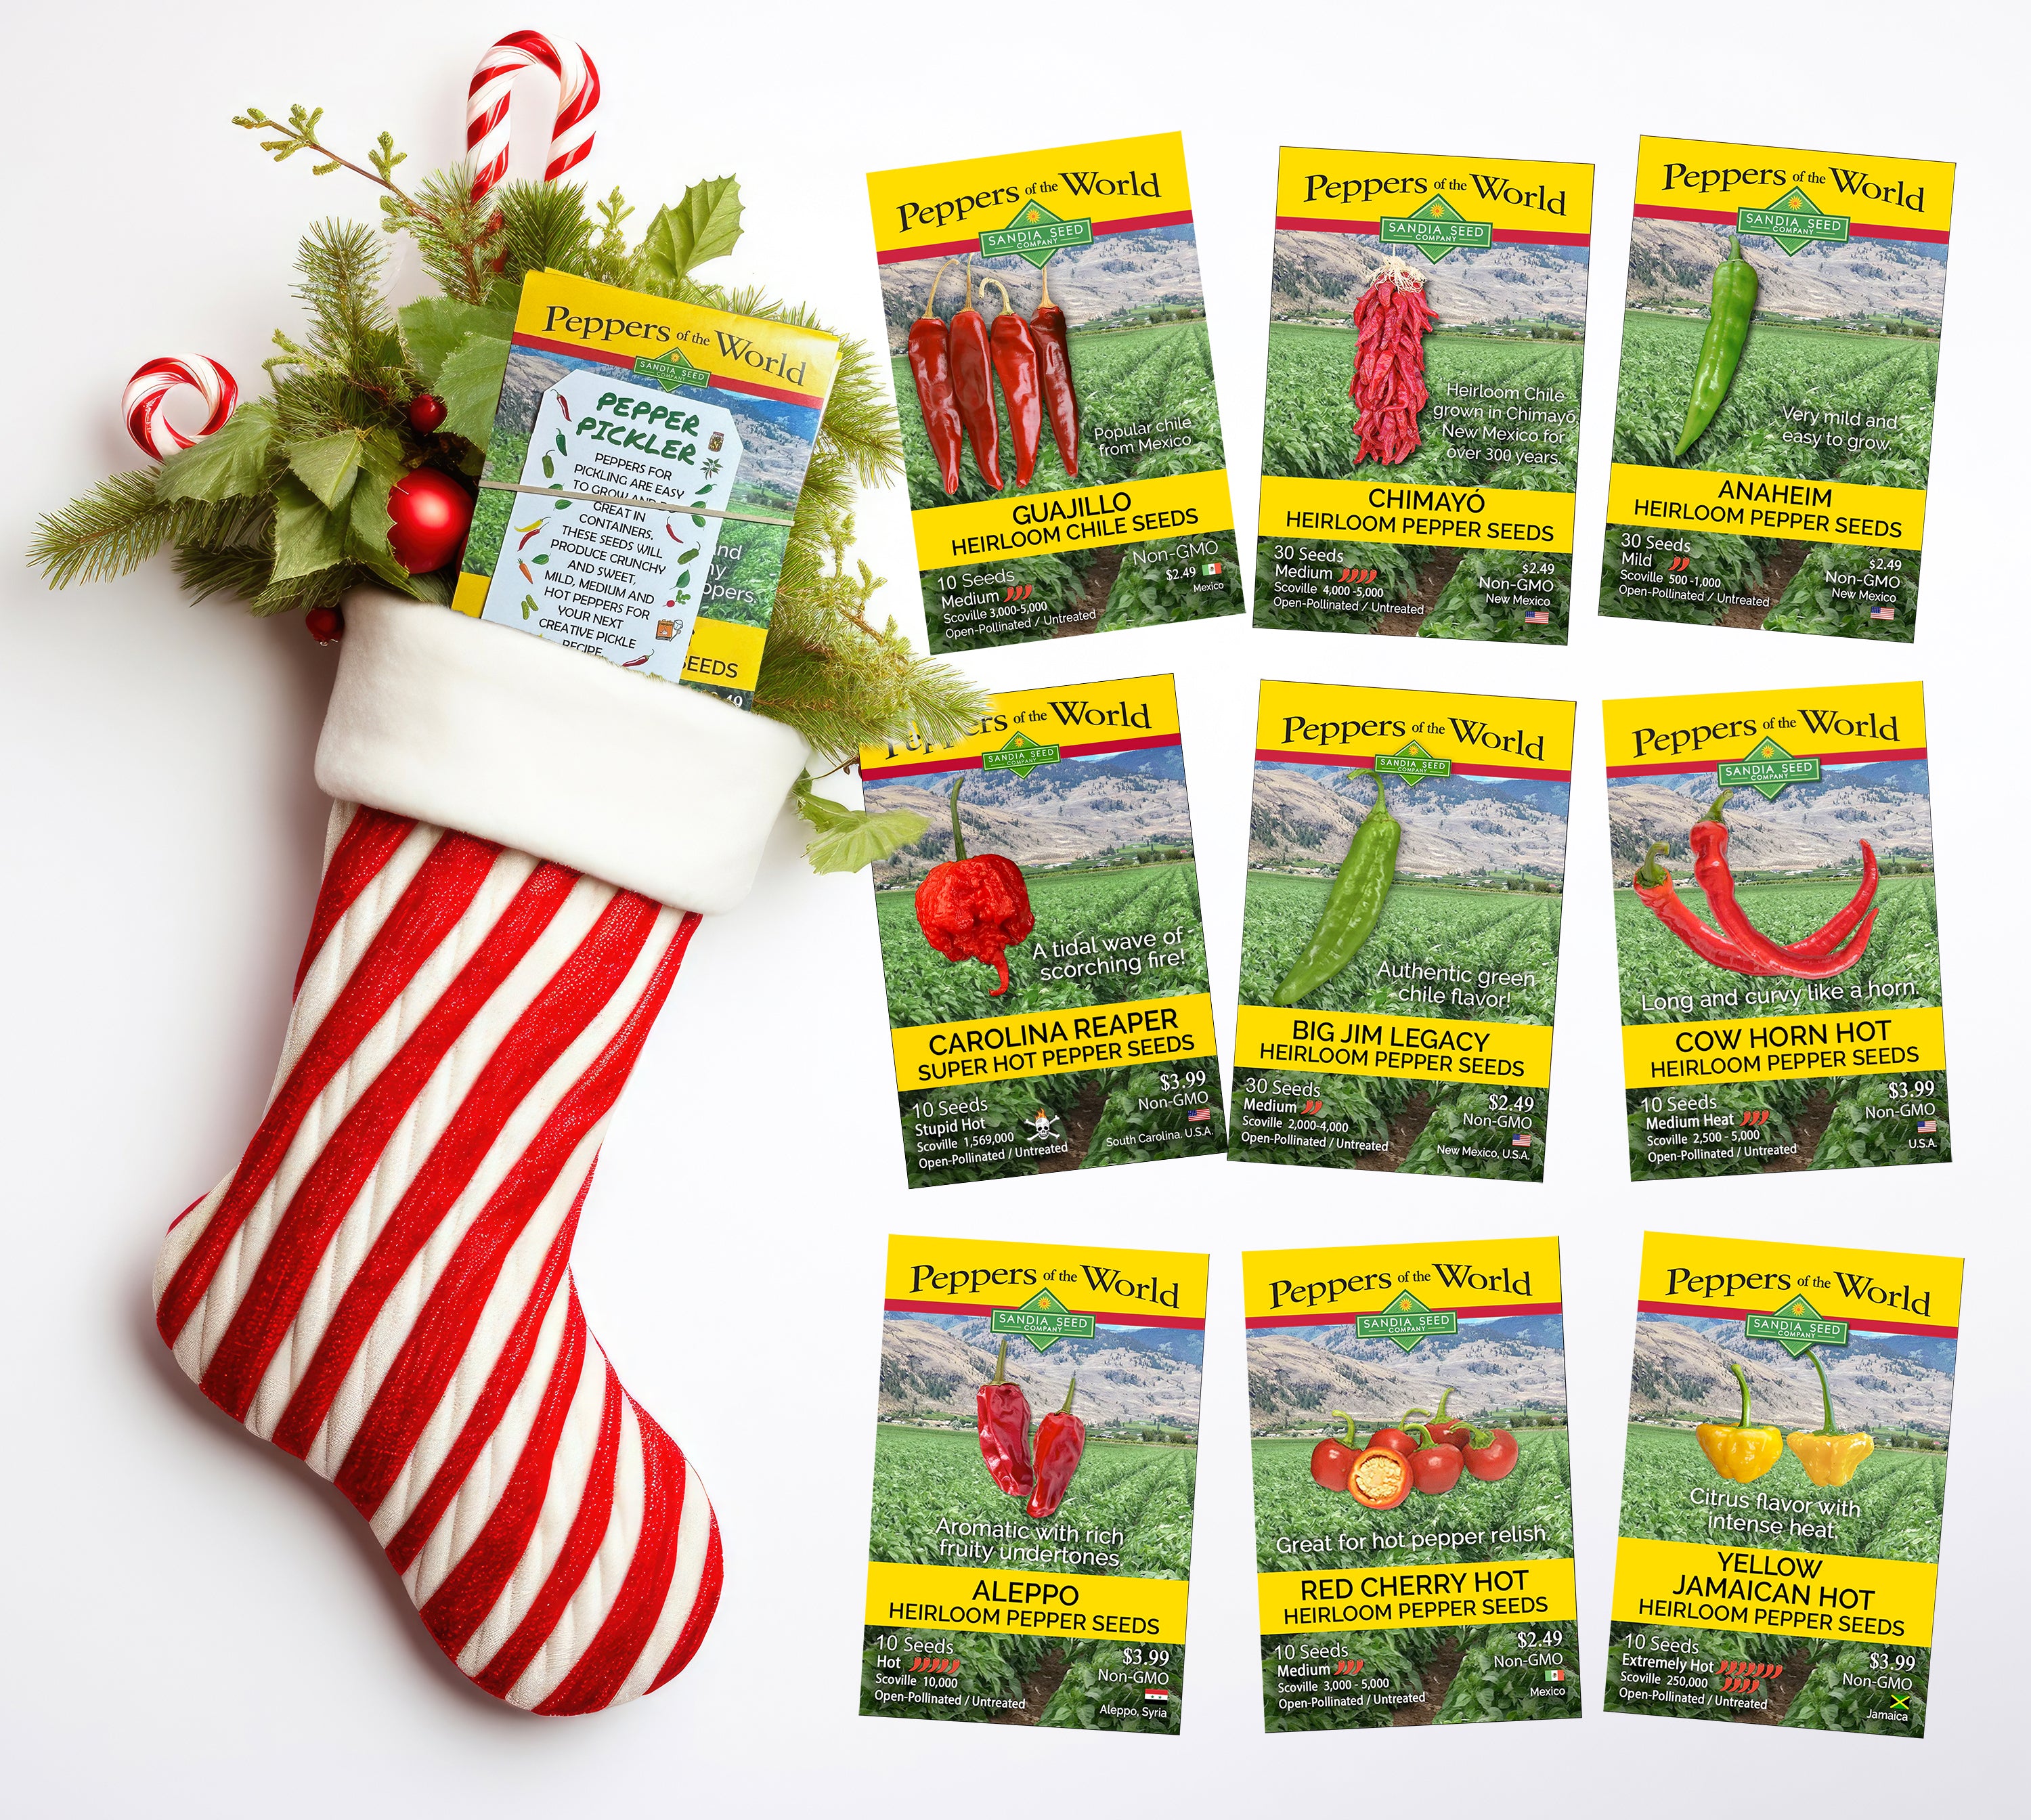 Unusual Gifts for Gardeners - Rare Seeds!